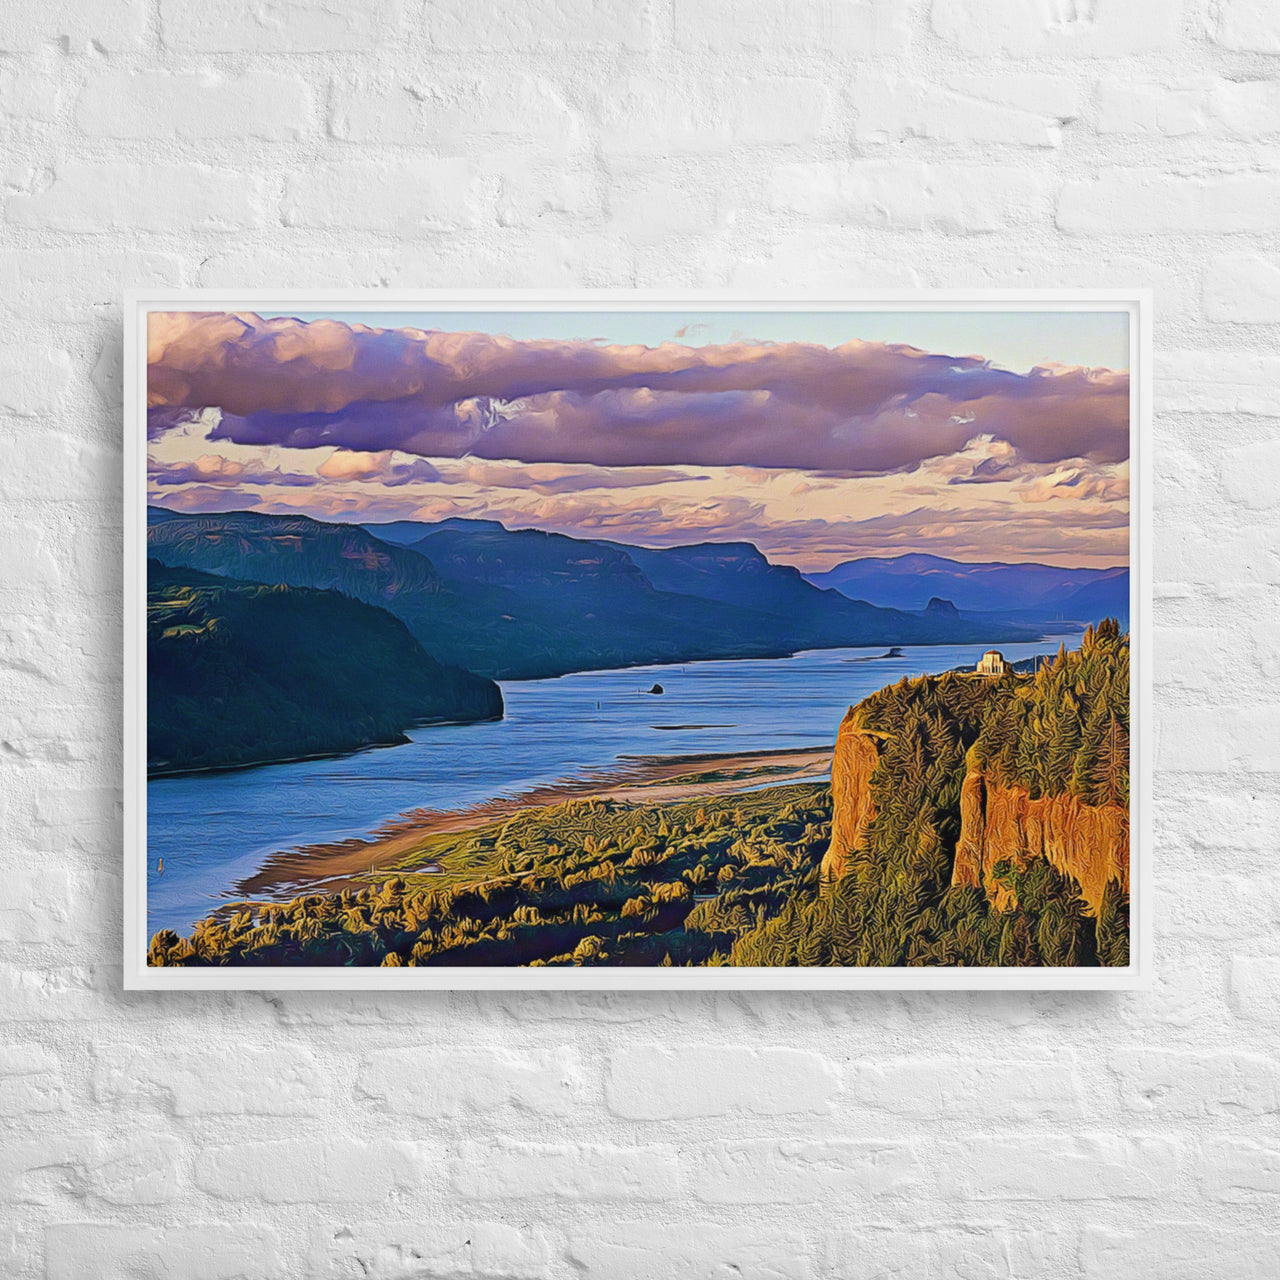 Columbia River Gorge - Digital Art - Framed canvas - FREE SHIPPING